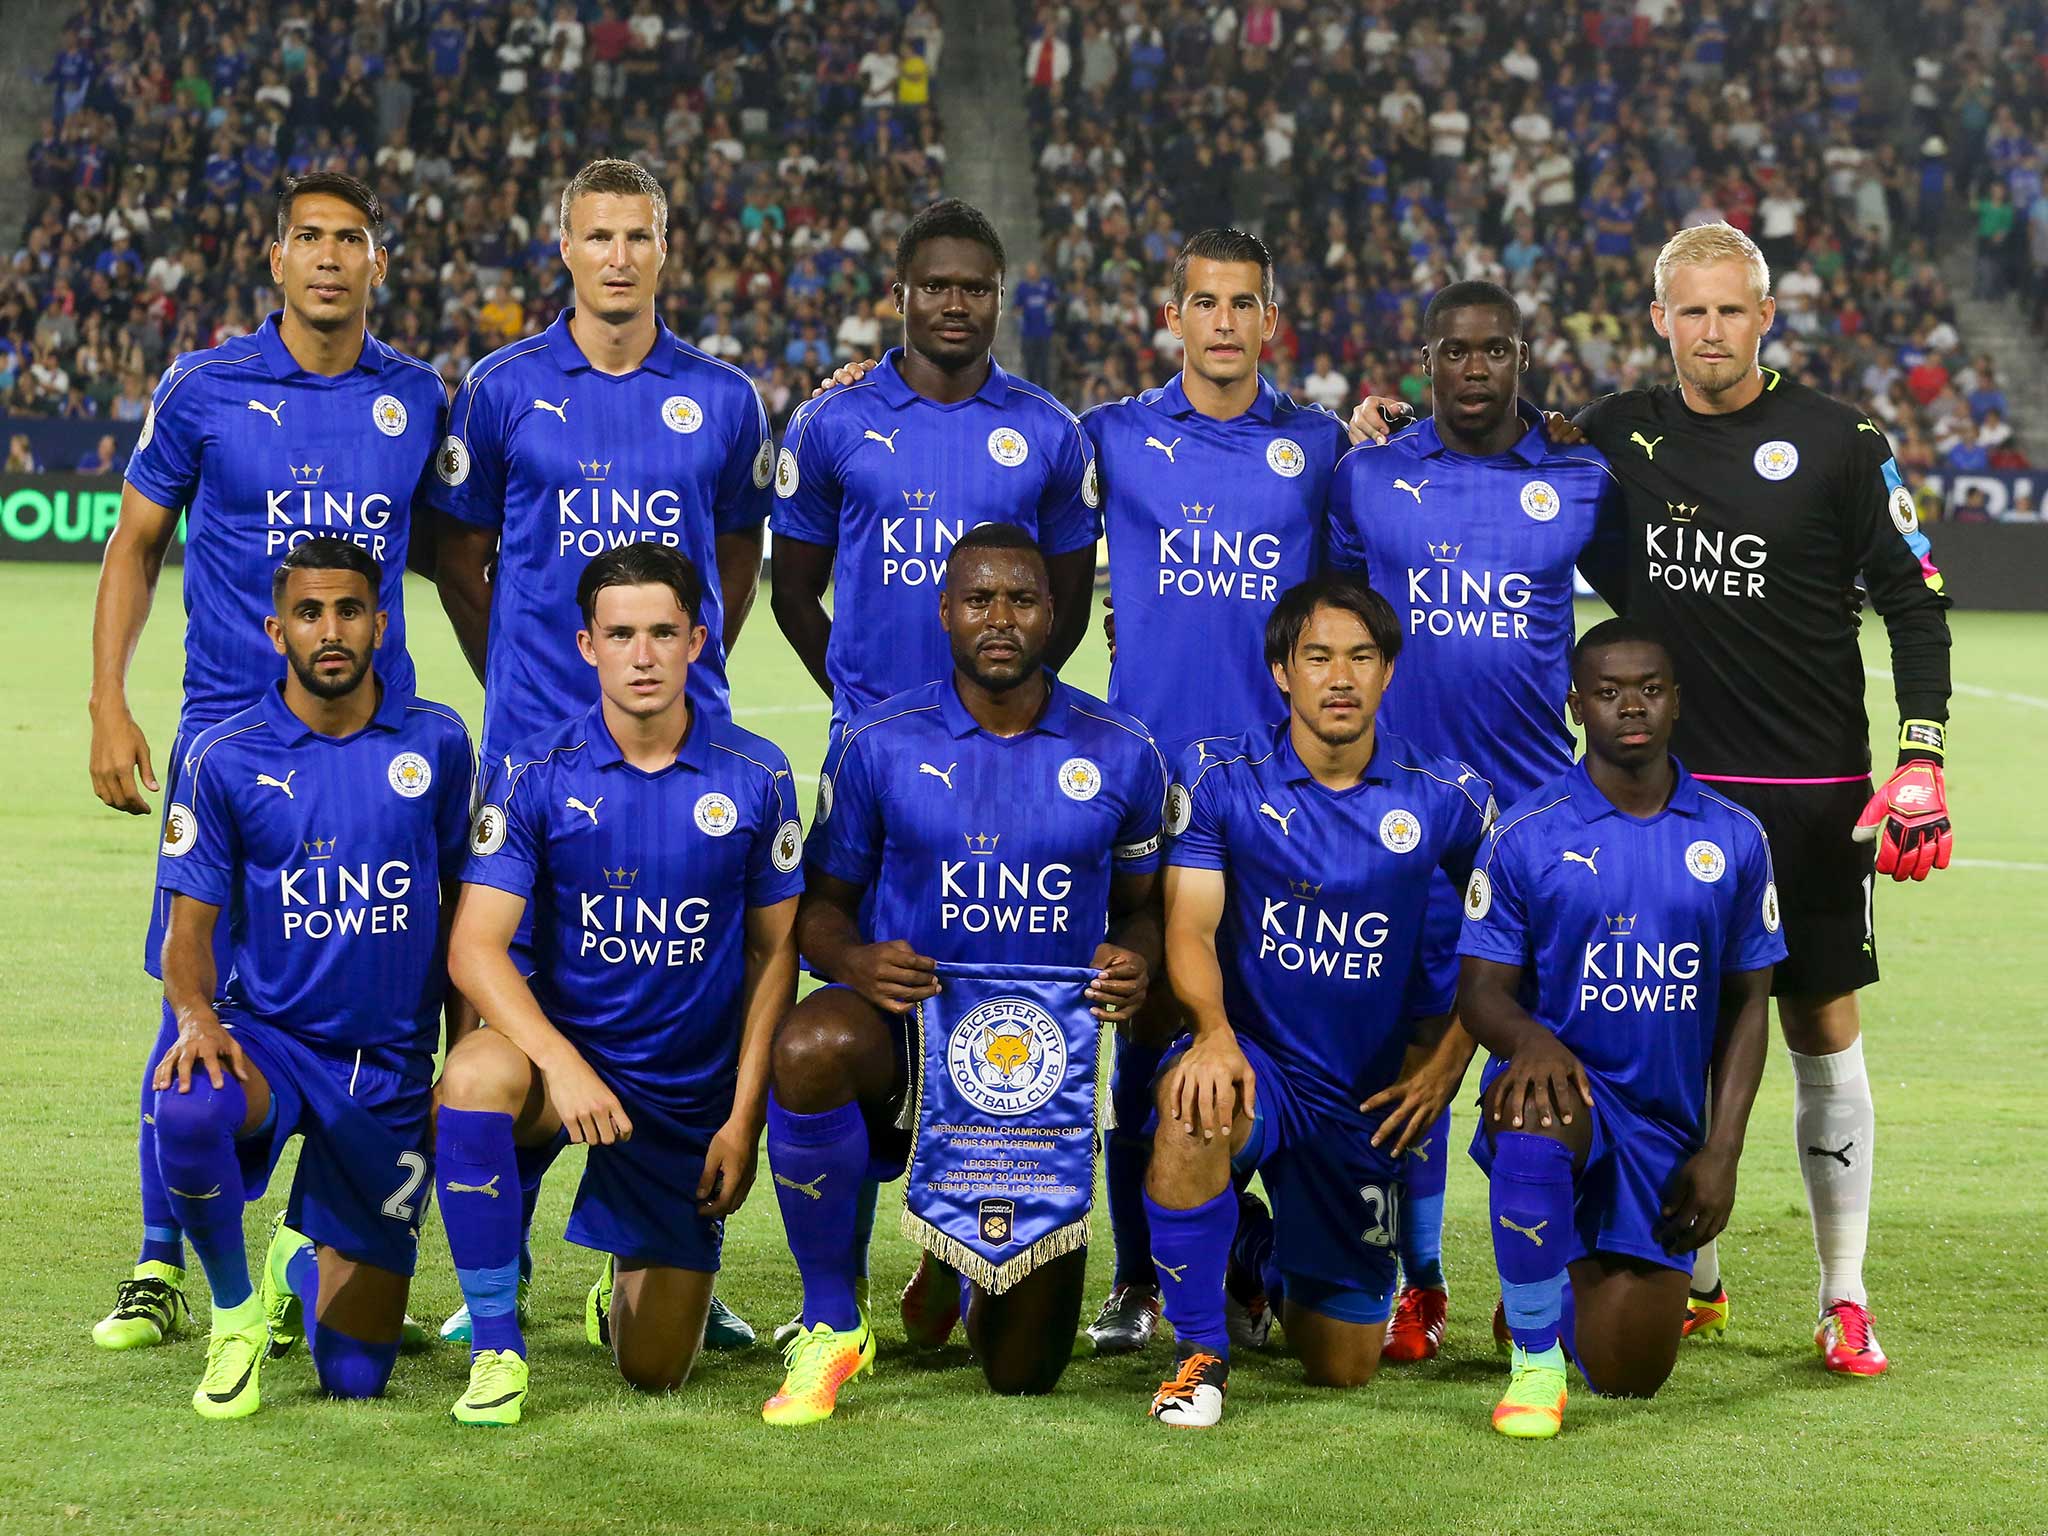 Leicester City line-up before the match against Paris Saint-Germain in Los Angeles